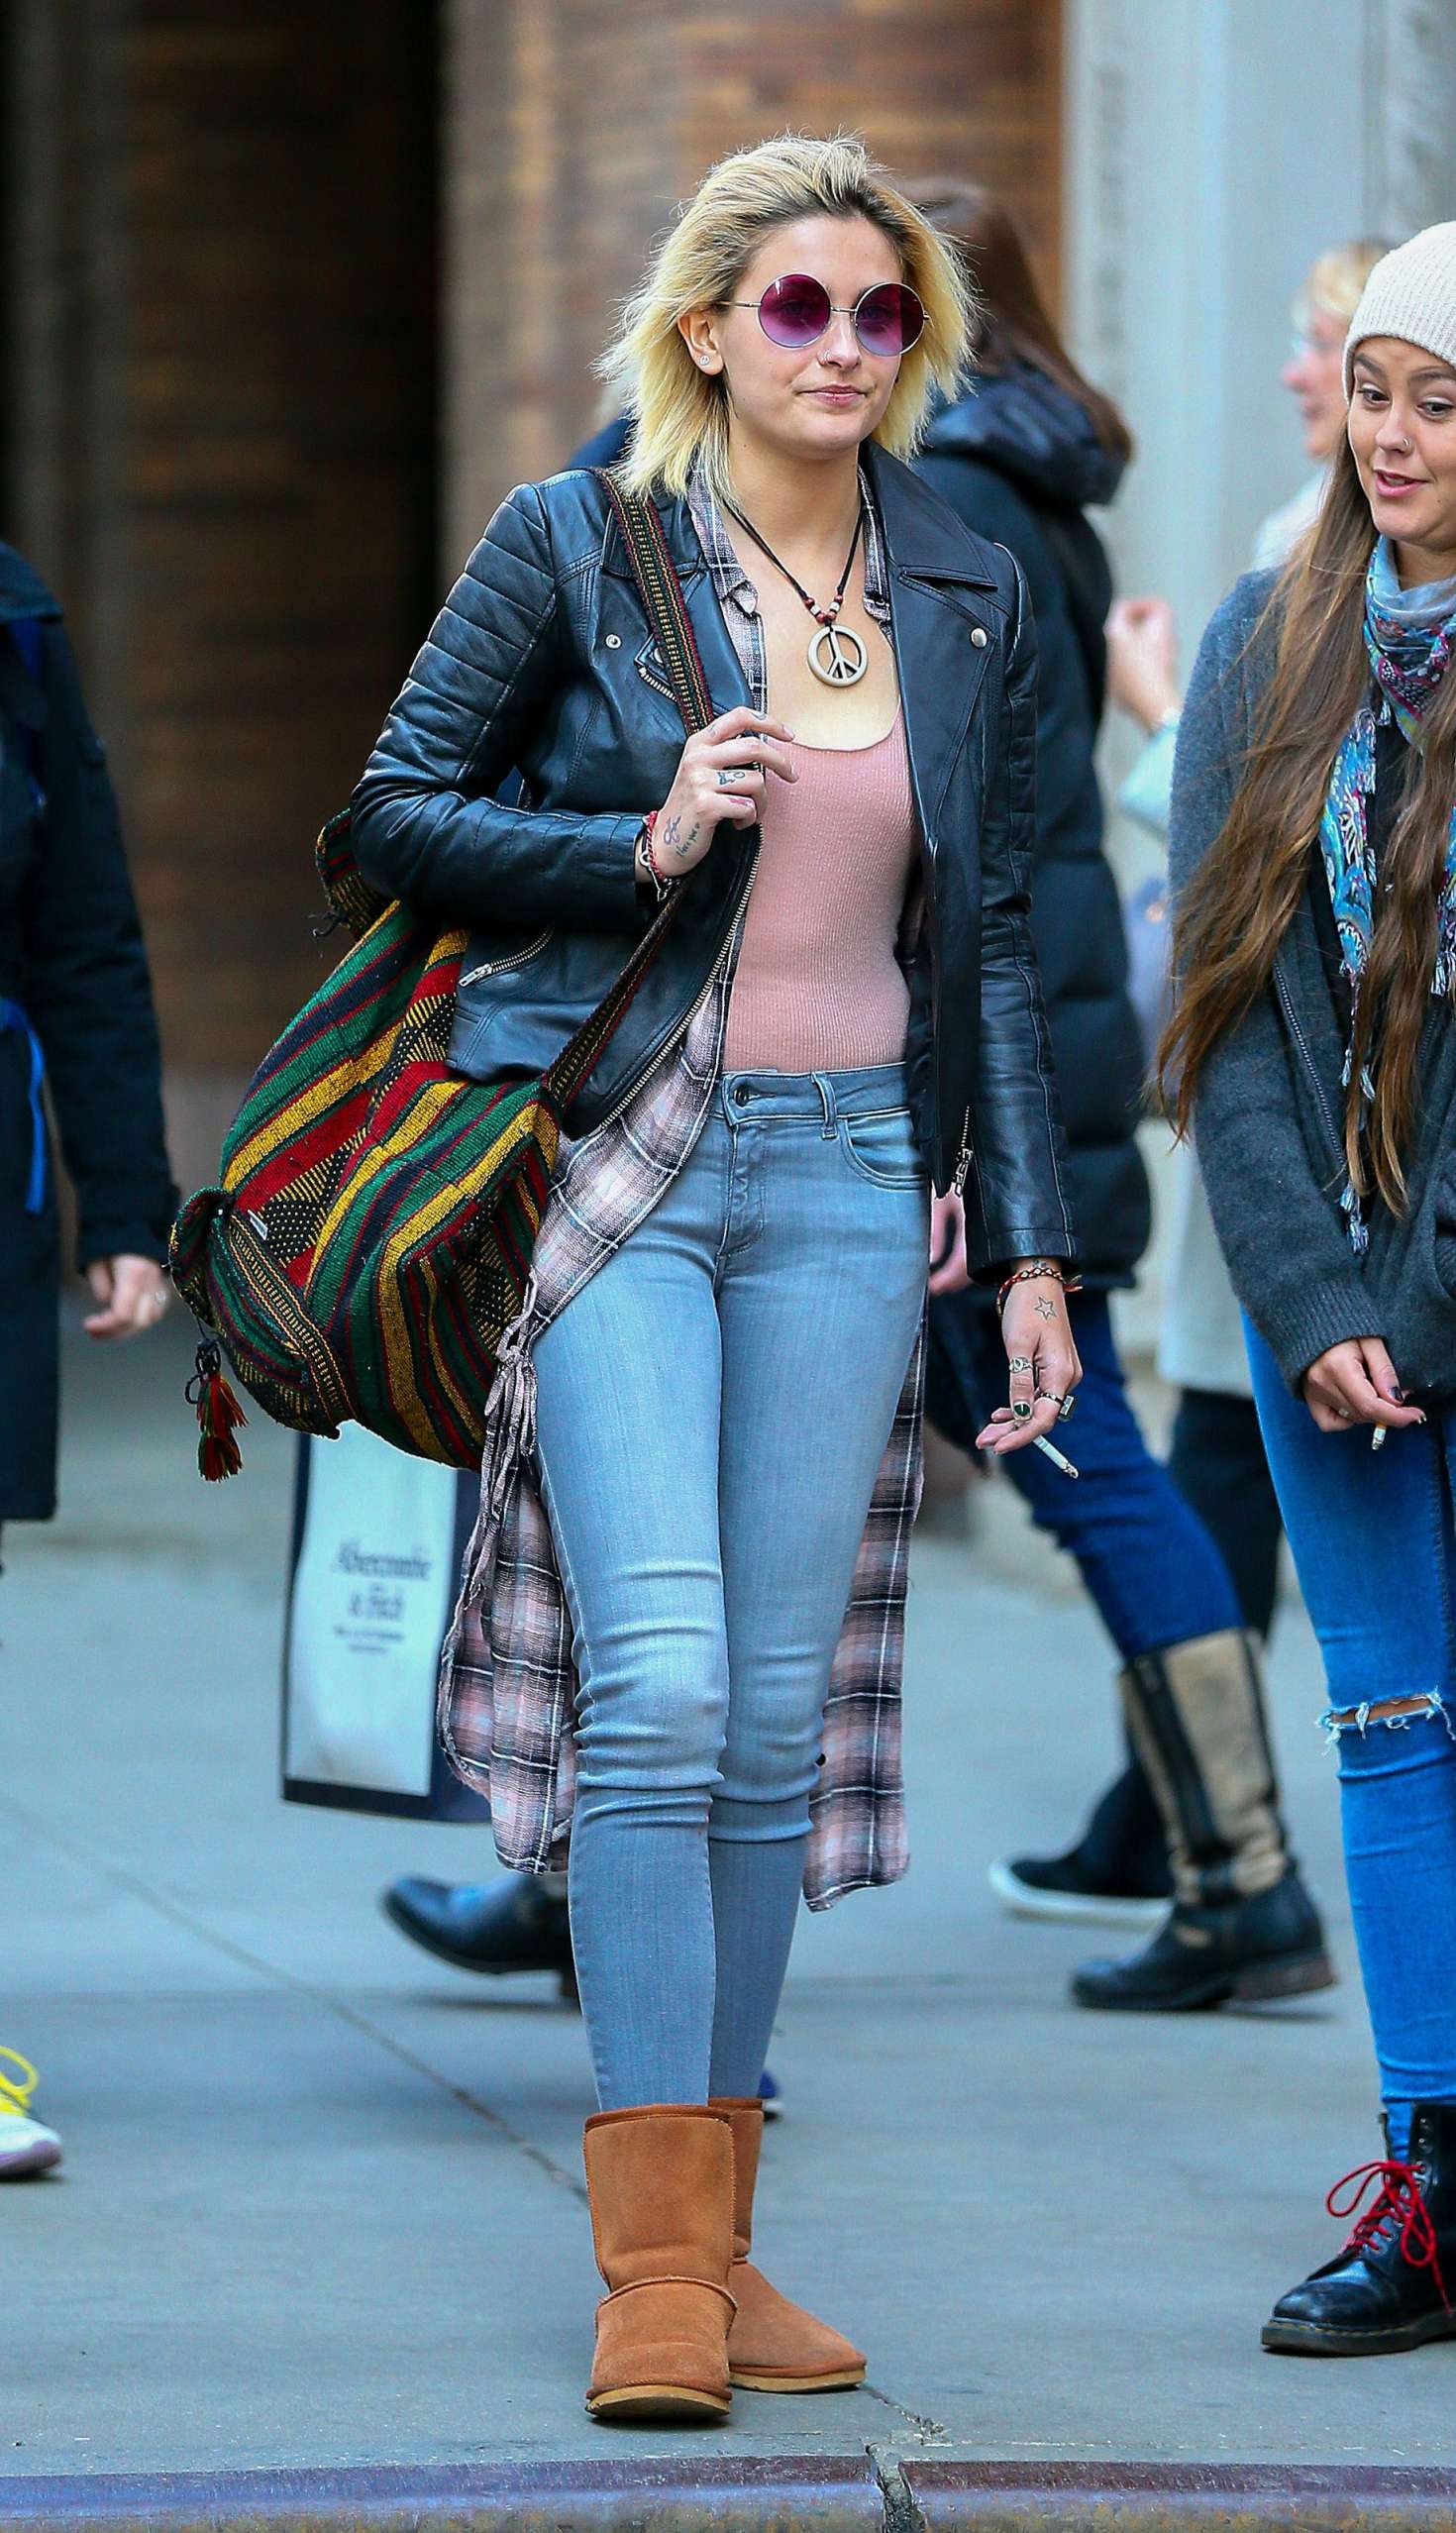 Paris Jackson out in New York